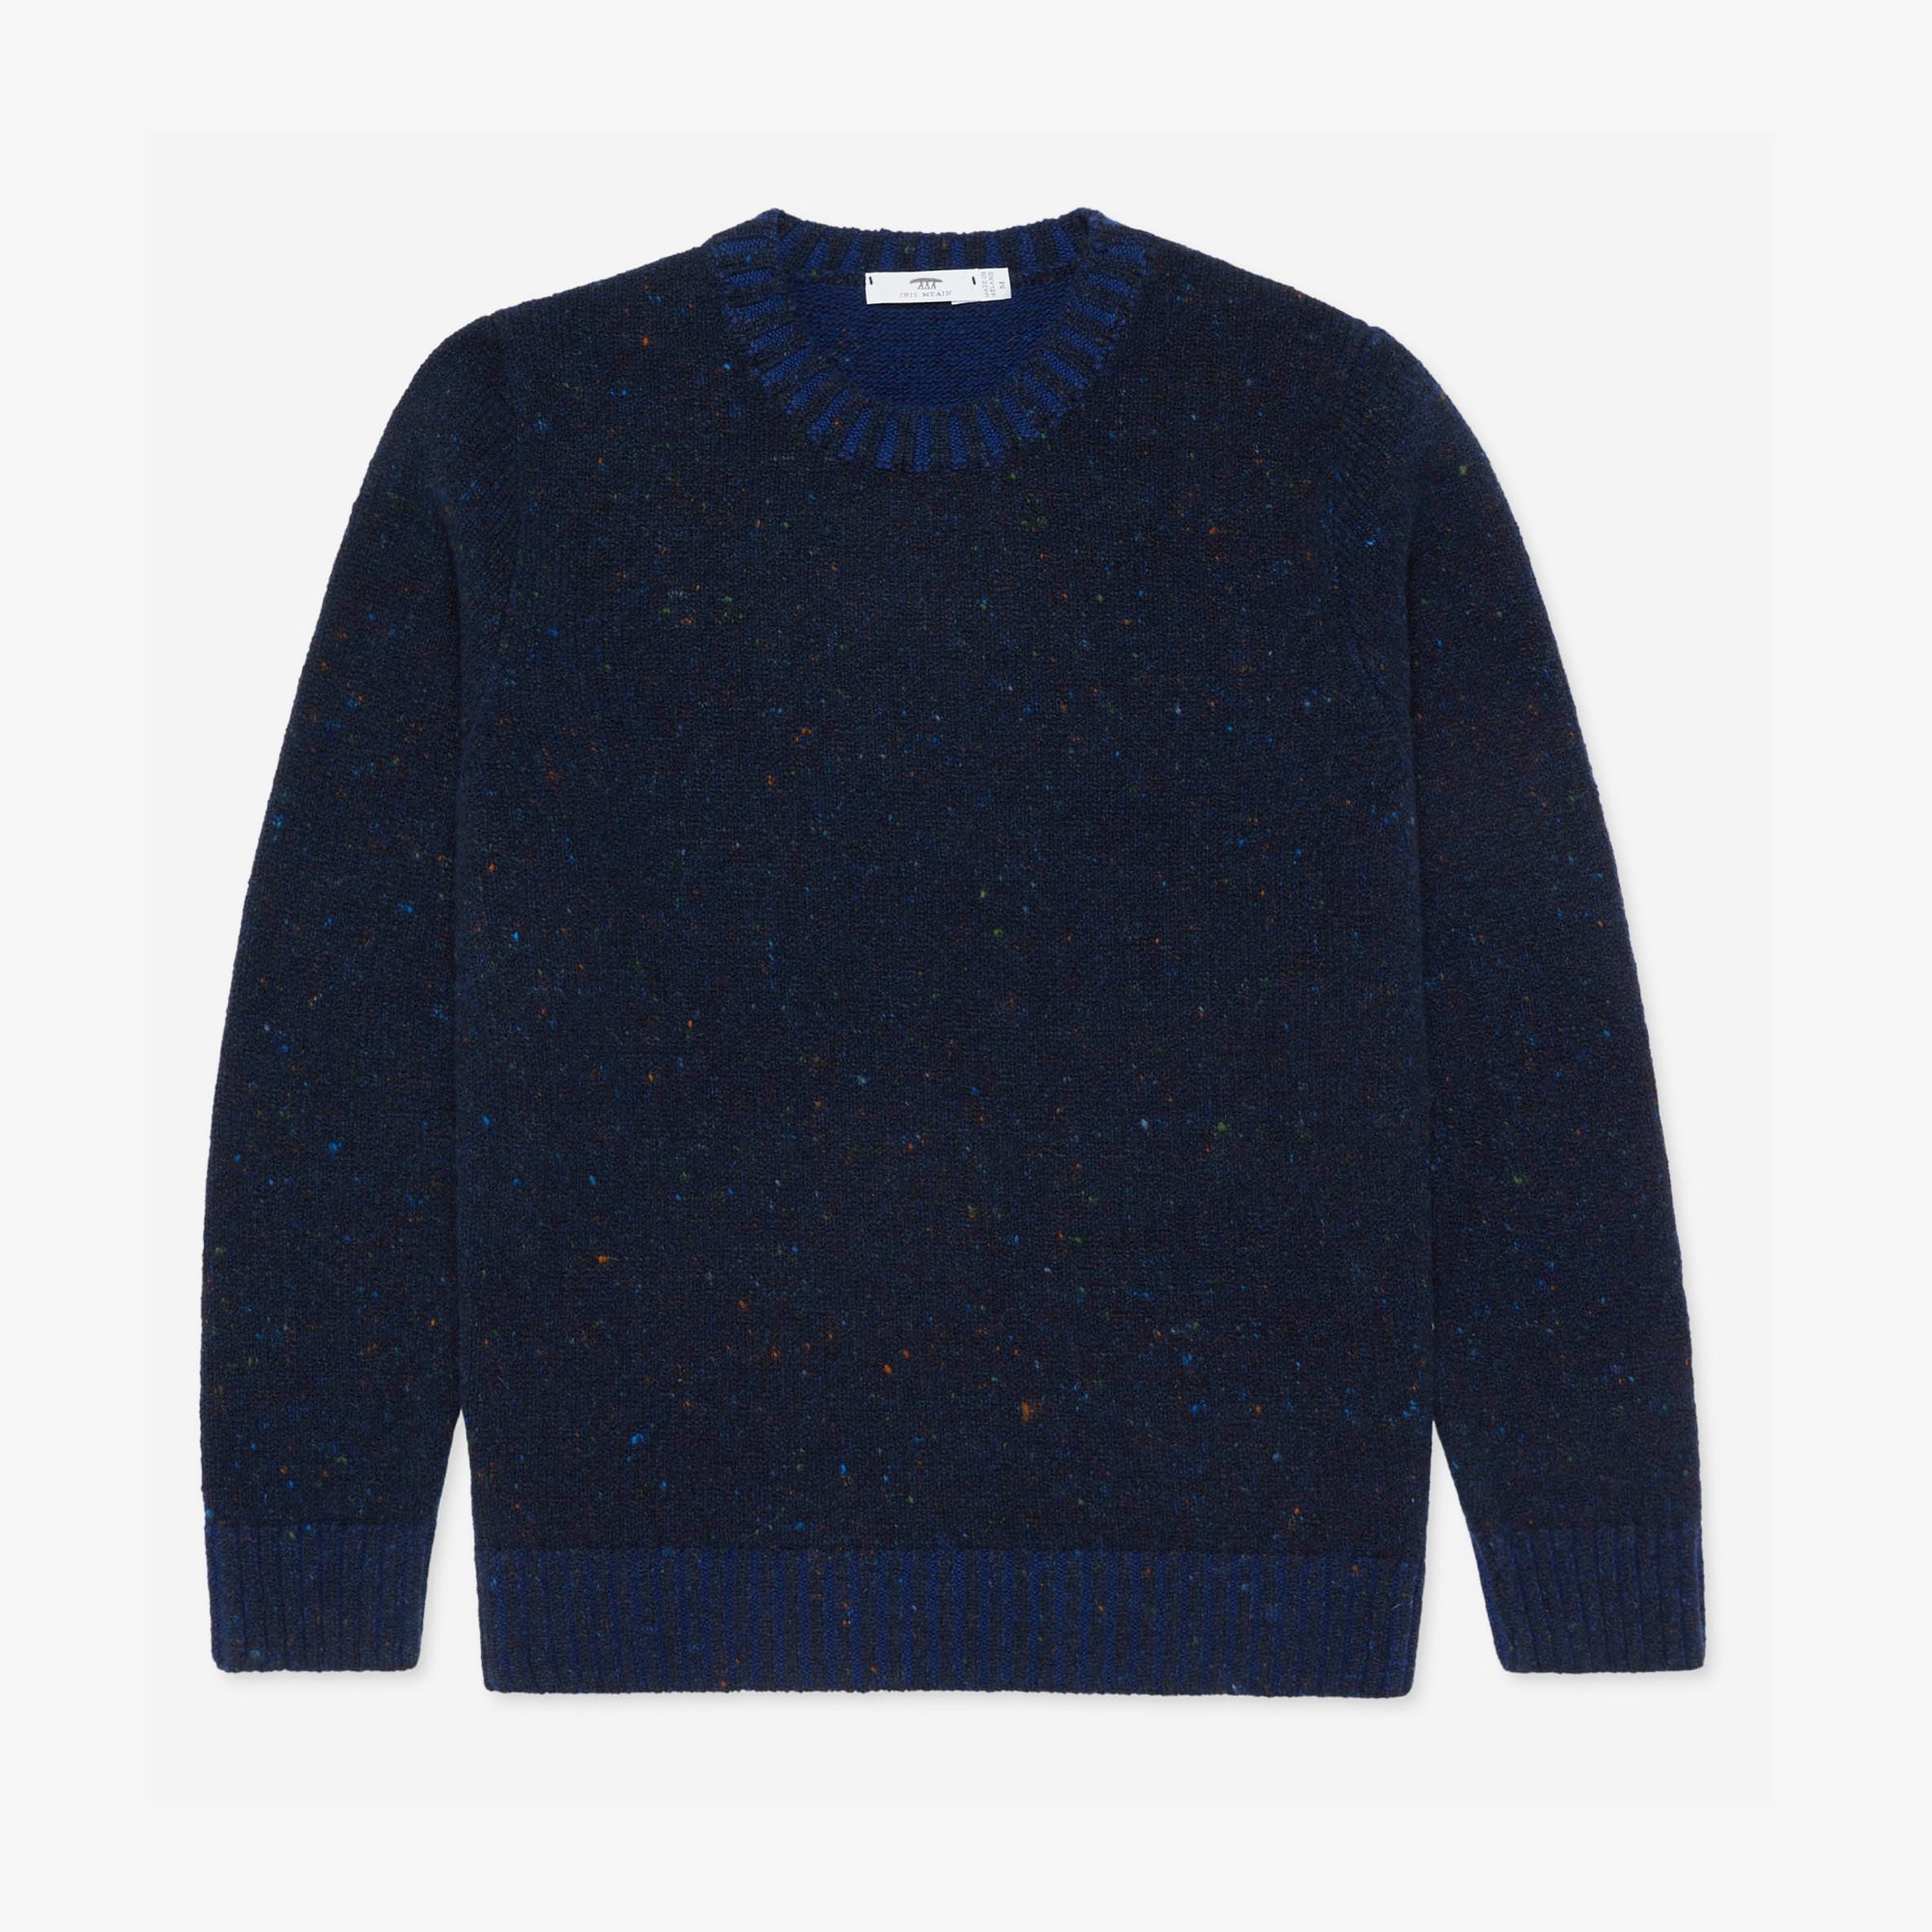 Classic Crew Neck - Nocturne — Inis Meáin Knitwear